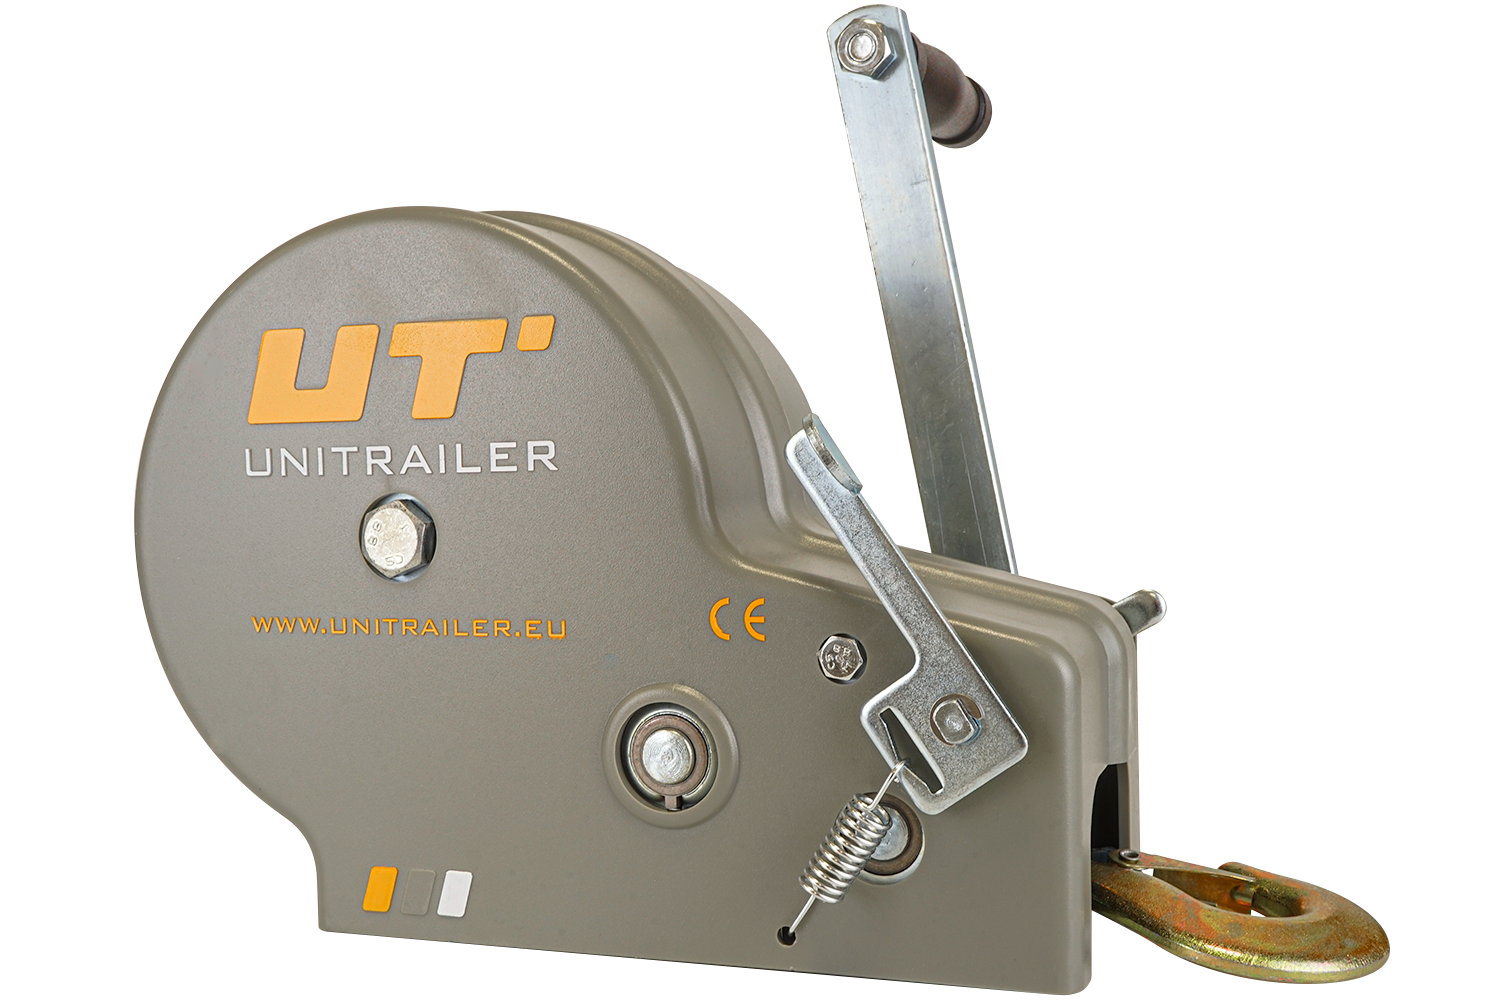 Hand winch with strap and UNITRAILER casing 1135 kg - UNITRAILER